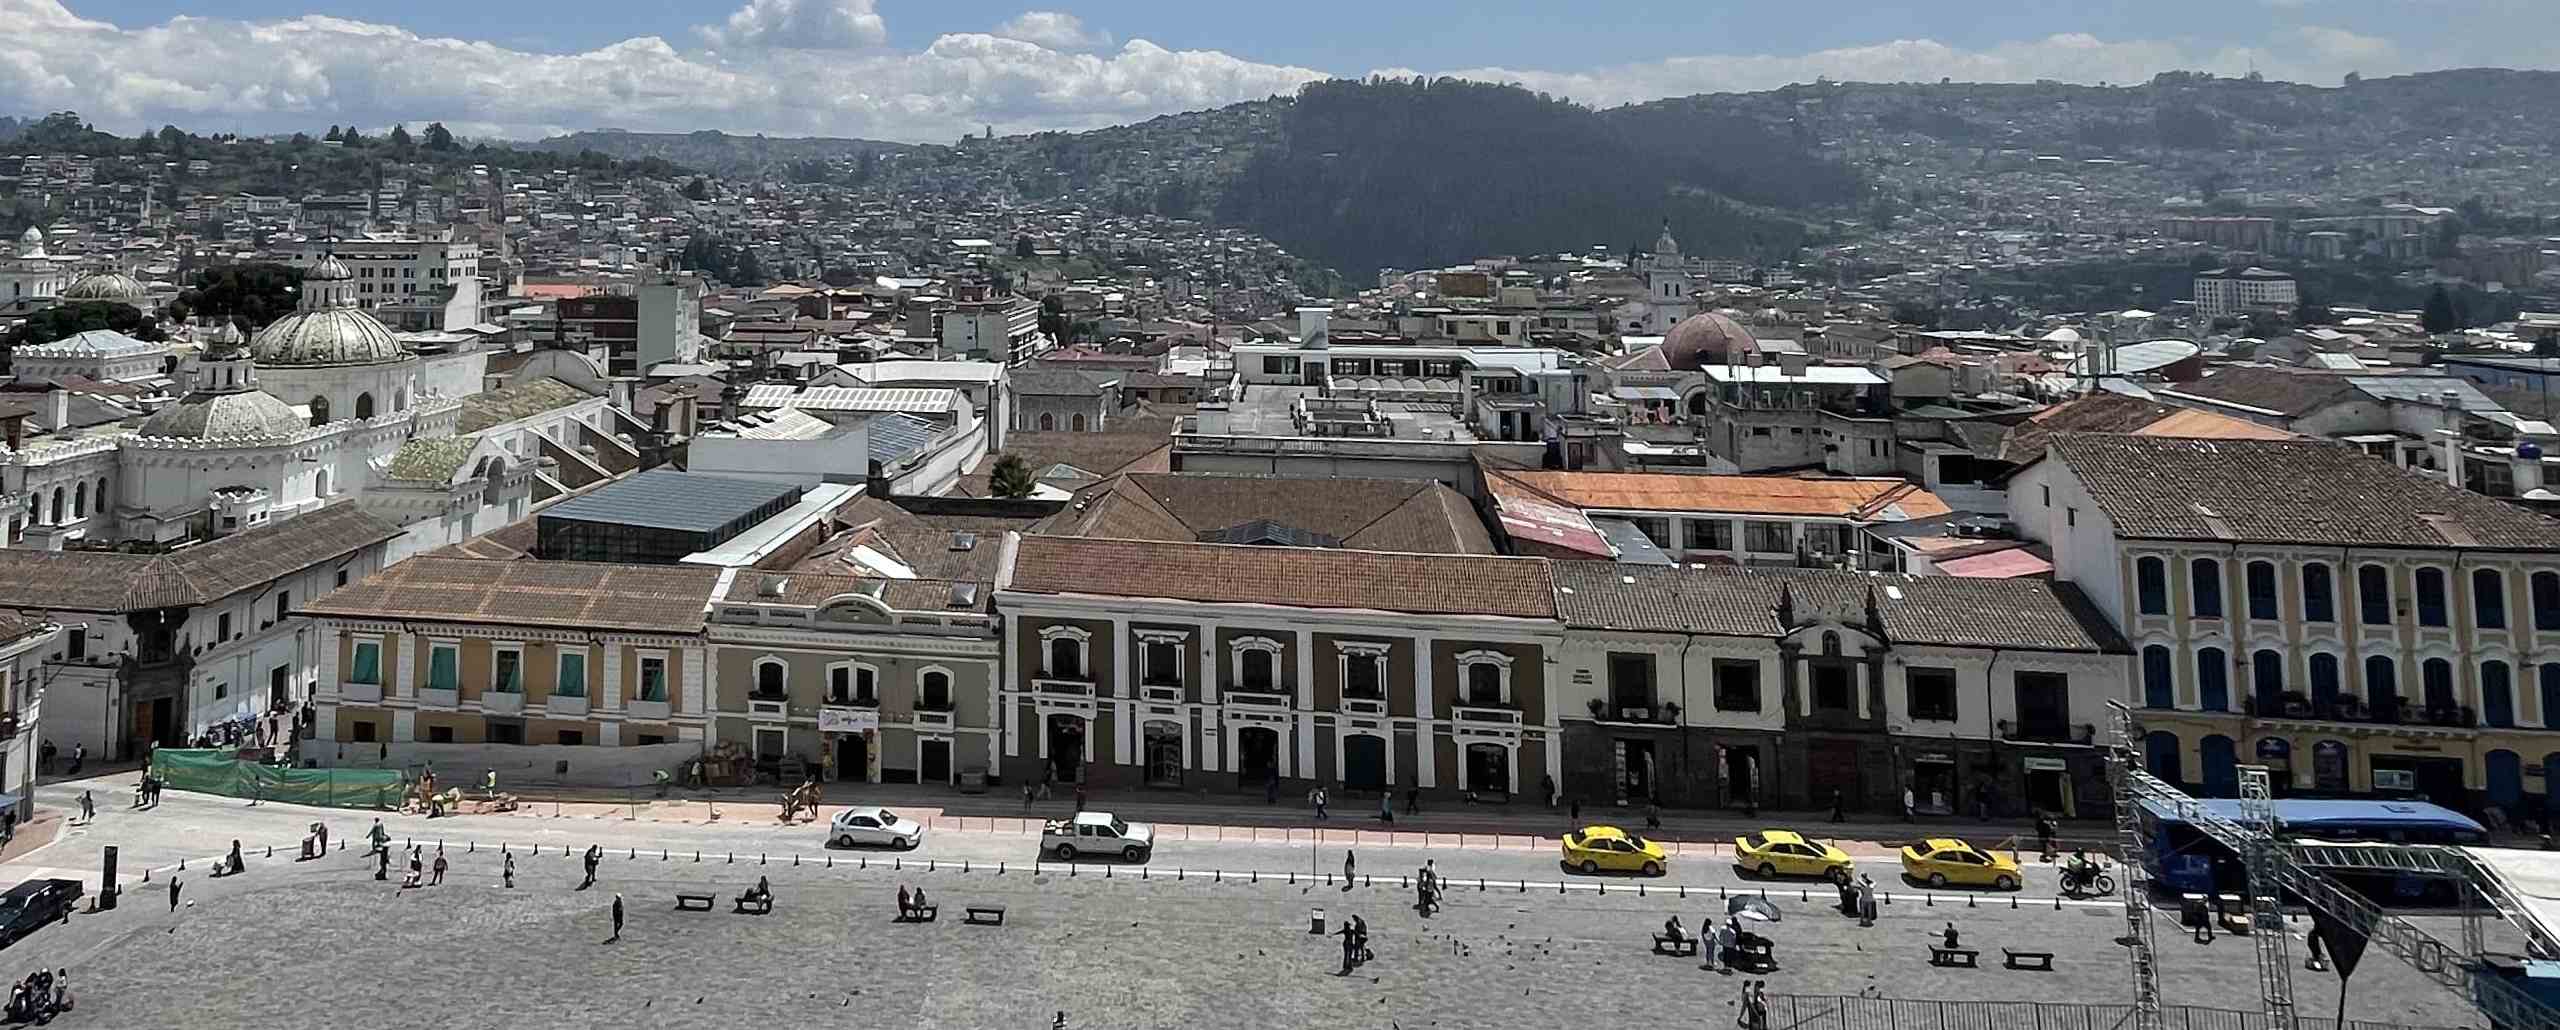 One of the reasons to visit Ecuador is Quito